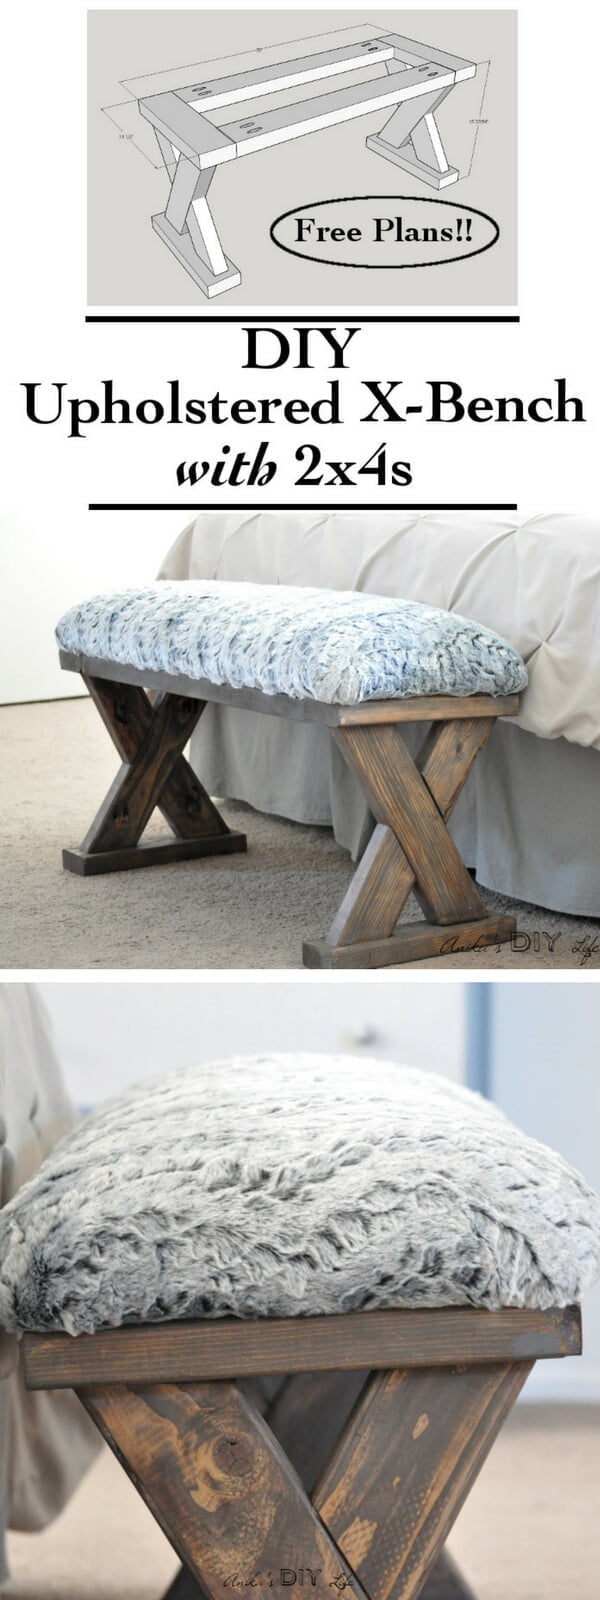 Make the Perfect DIY Upholstered X-Bench